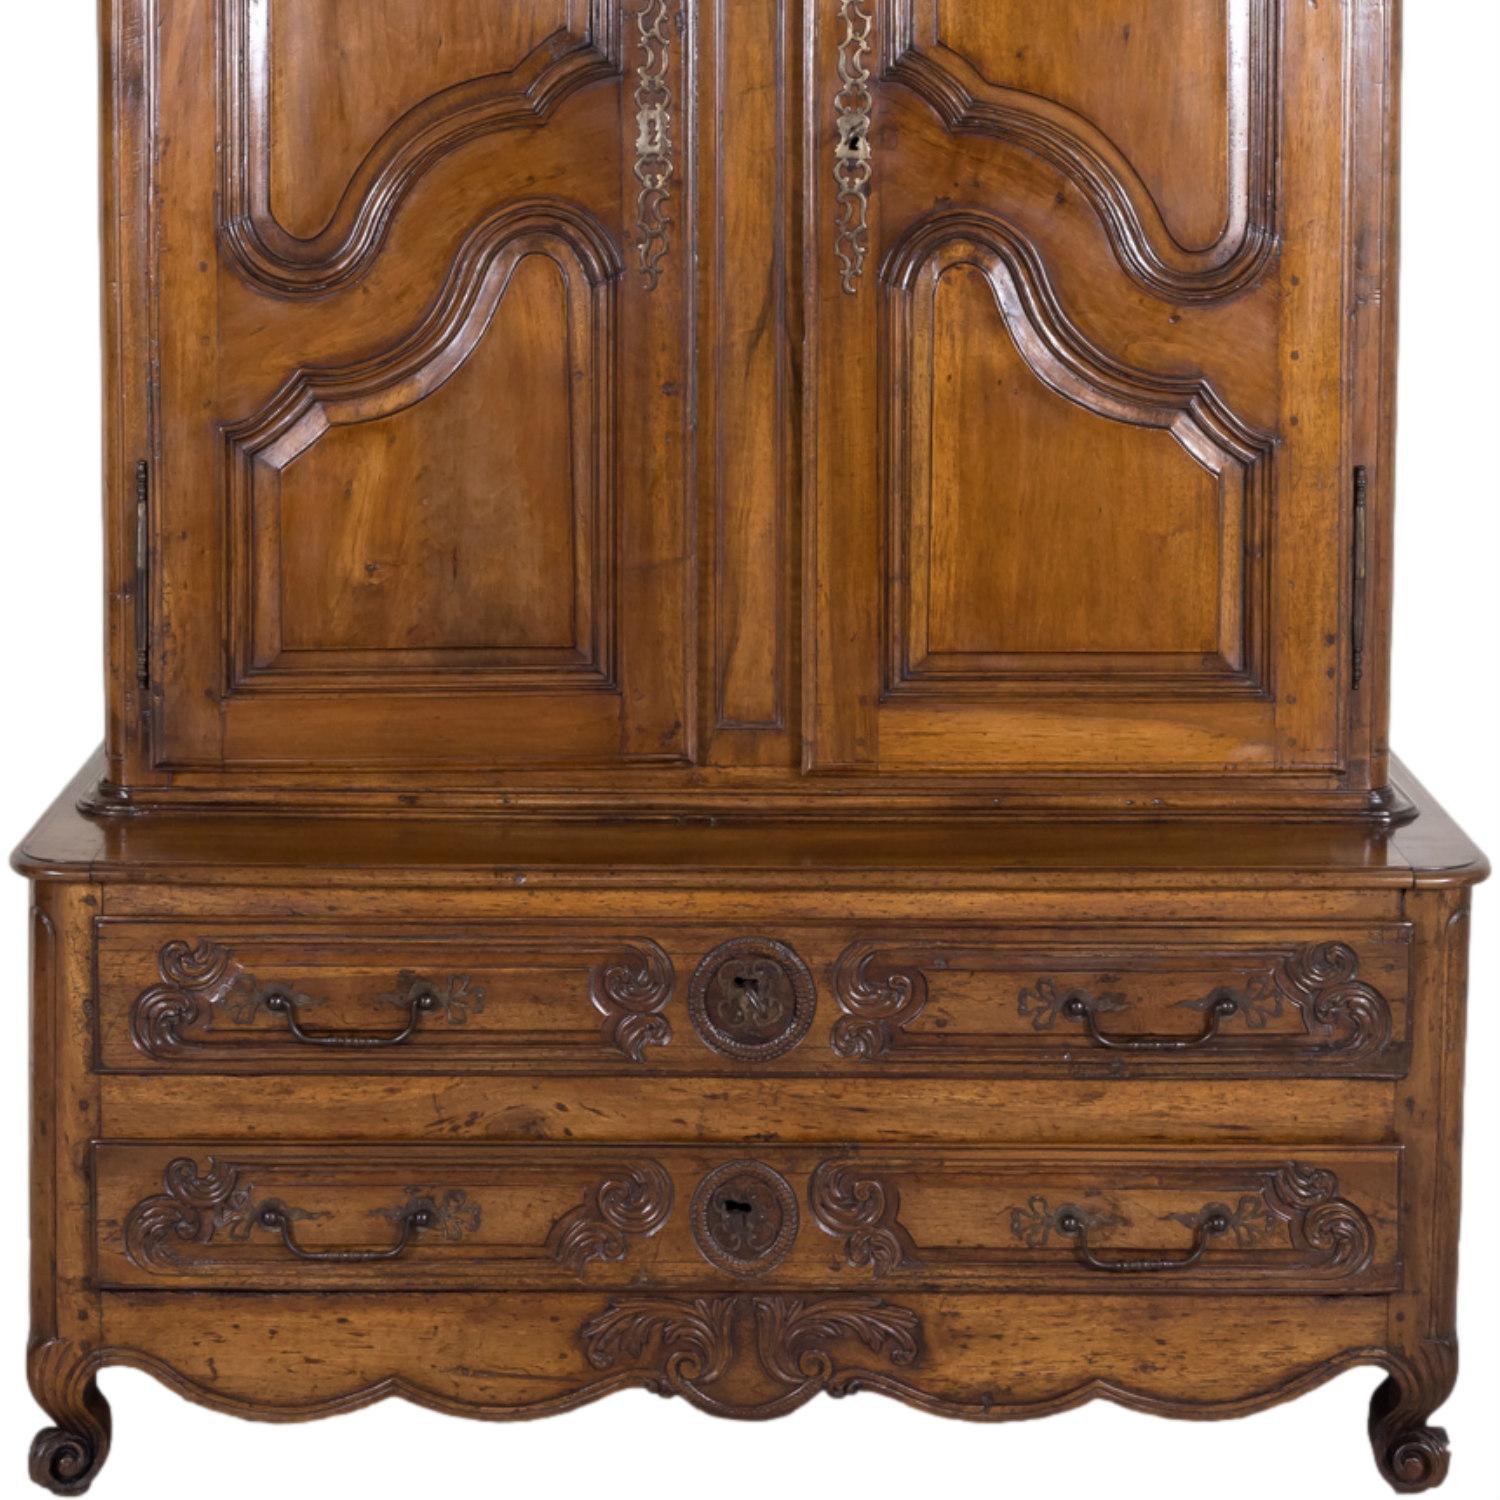 Rare 18th Century French Louis XV Period Walnut Armoire Pantalonnier Deux Corps For Sale 3